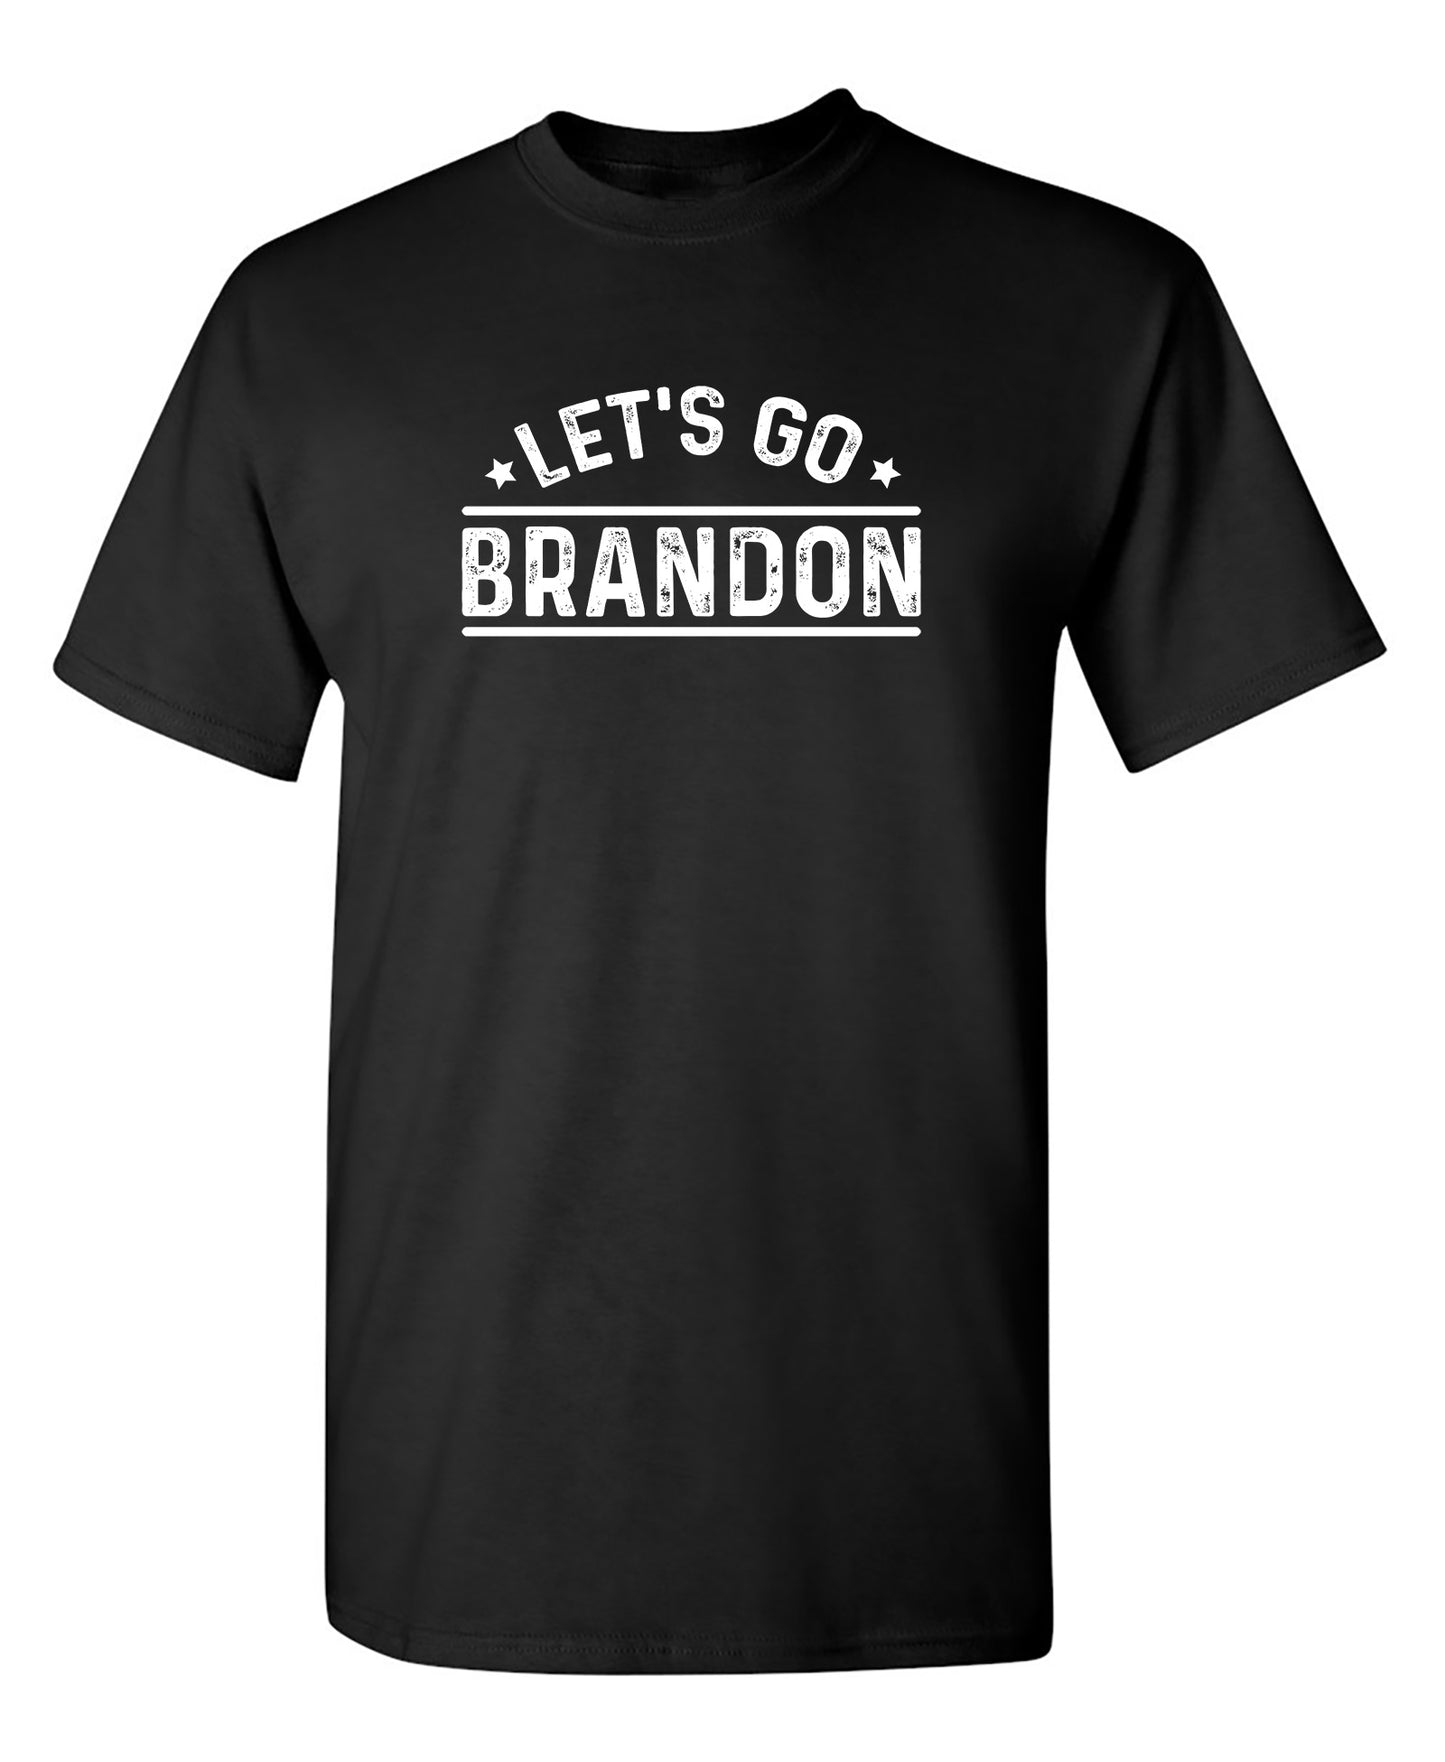 Lets Go Brandon - Funny T Shirts & Graphic Tees